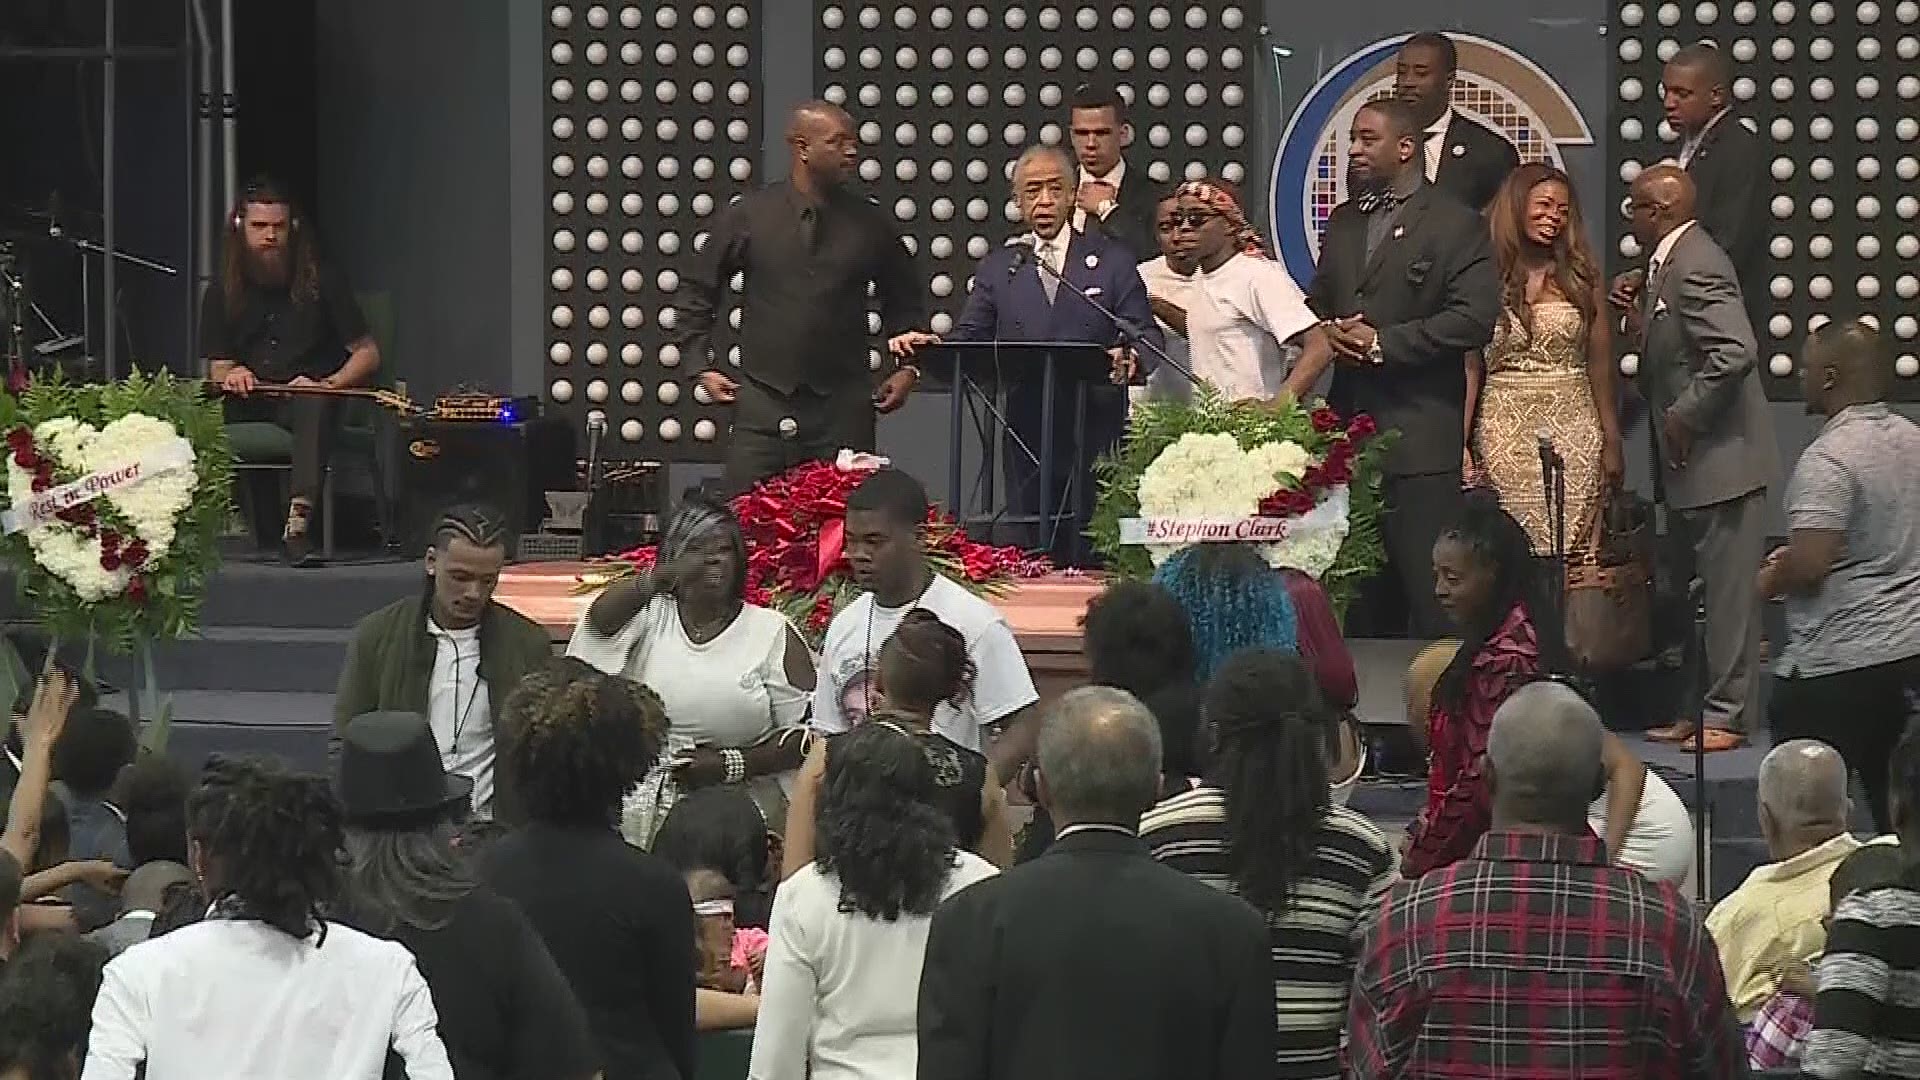 The raw, uncut video of Al Sharpton's eulogy at Stephon Clark's funeral.